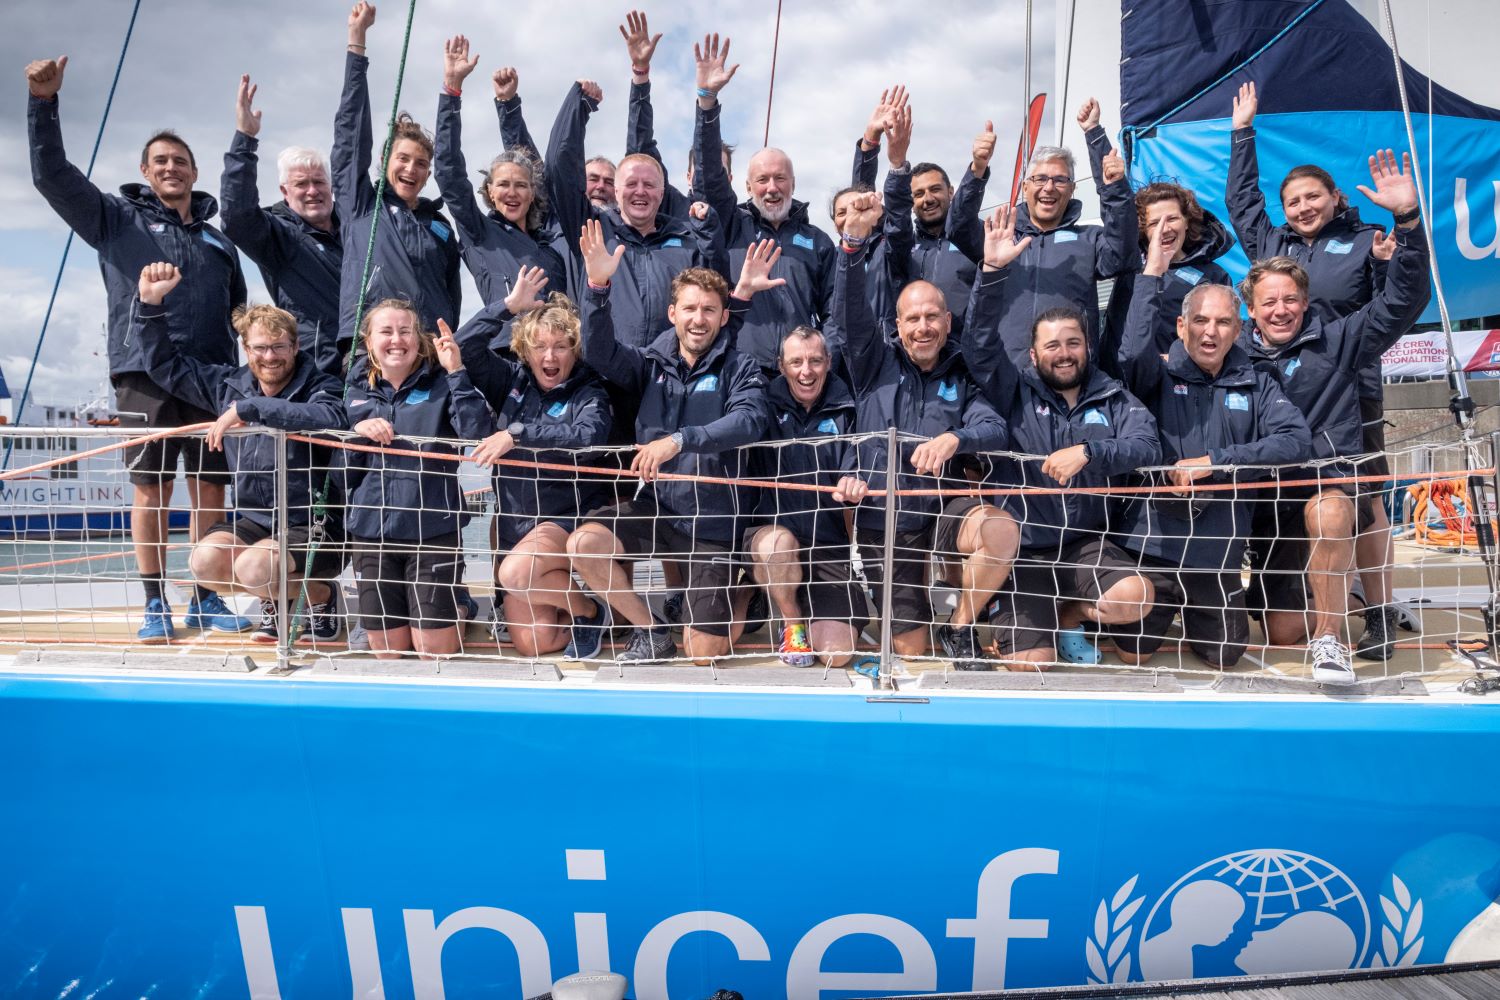 ​UNICEF set the bar high as first team to achieve £30,000 charity fundraising target.